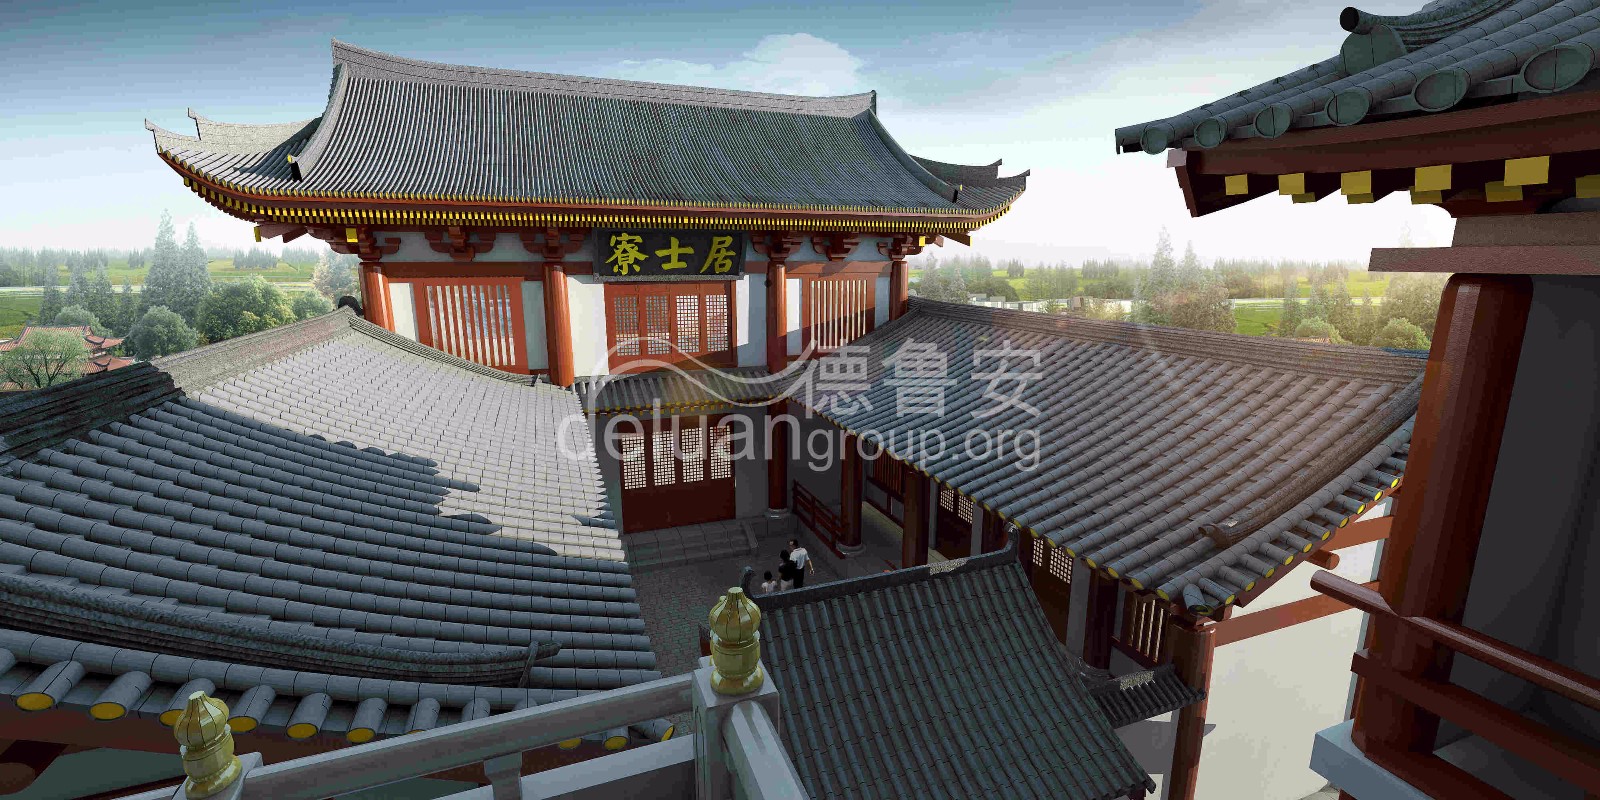 Planning and design of Baoqing temple in Xianghe(图23)